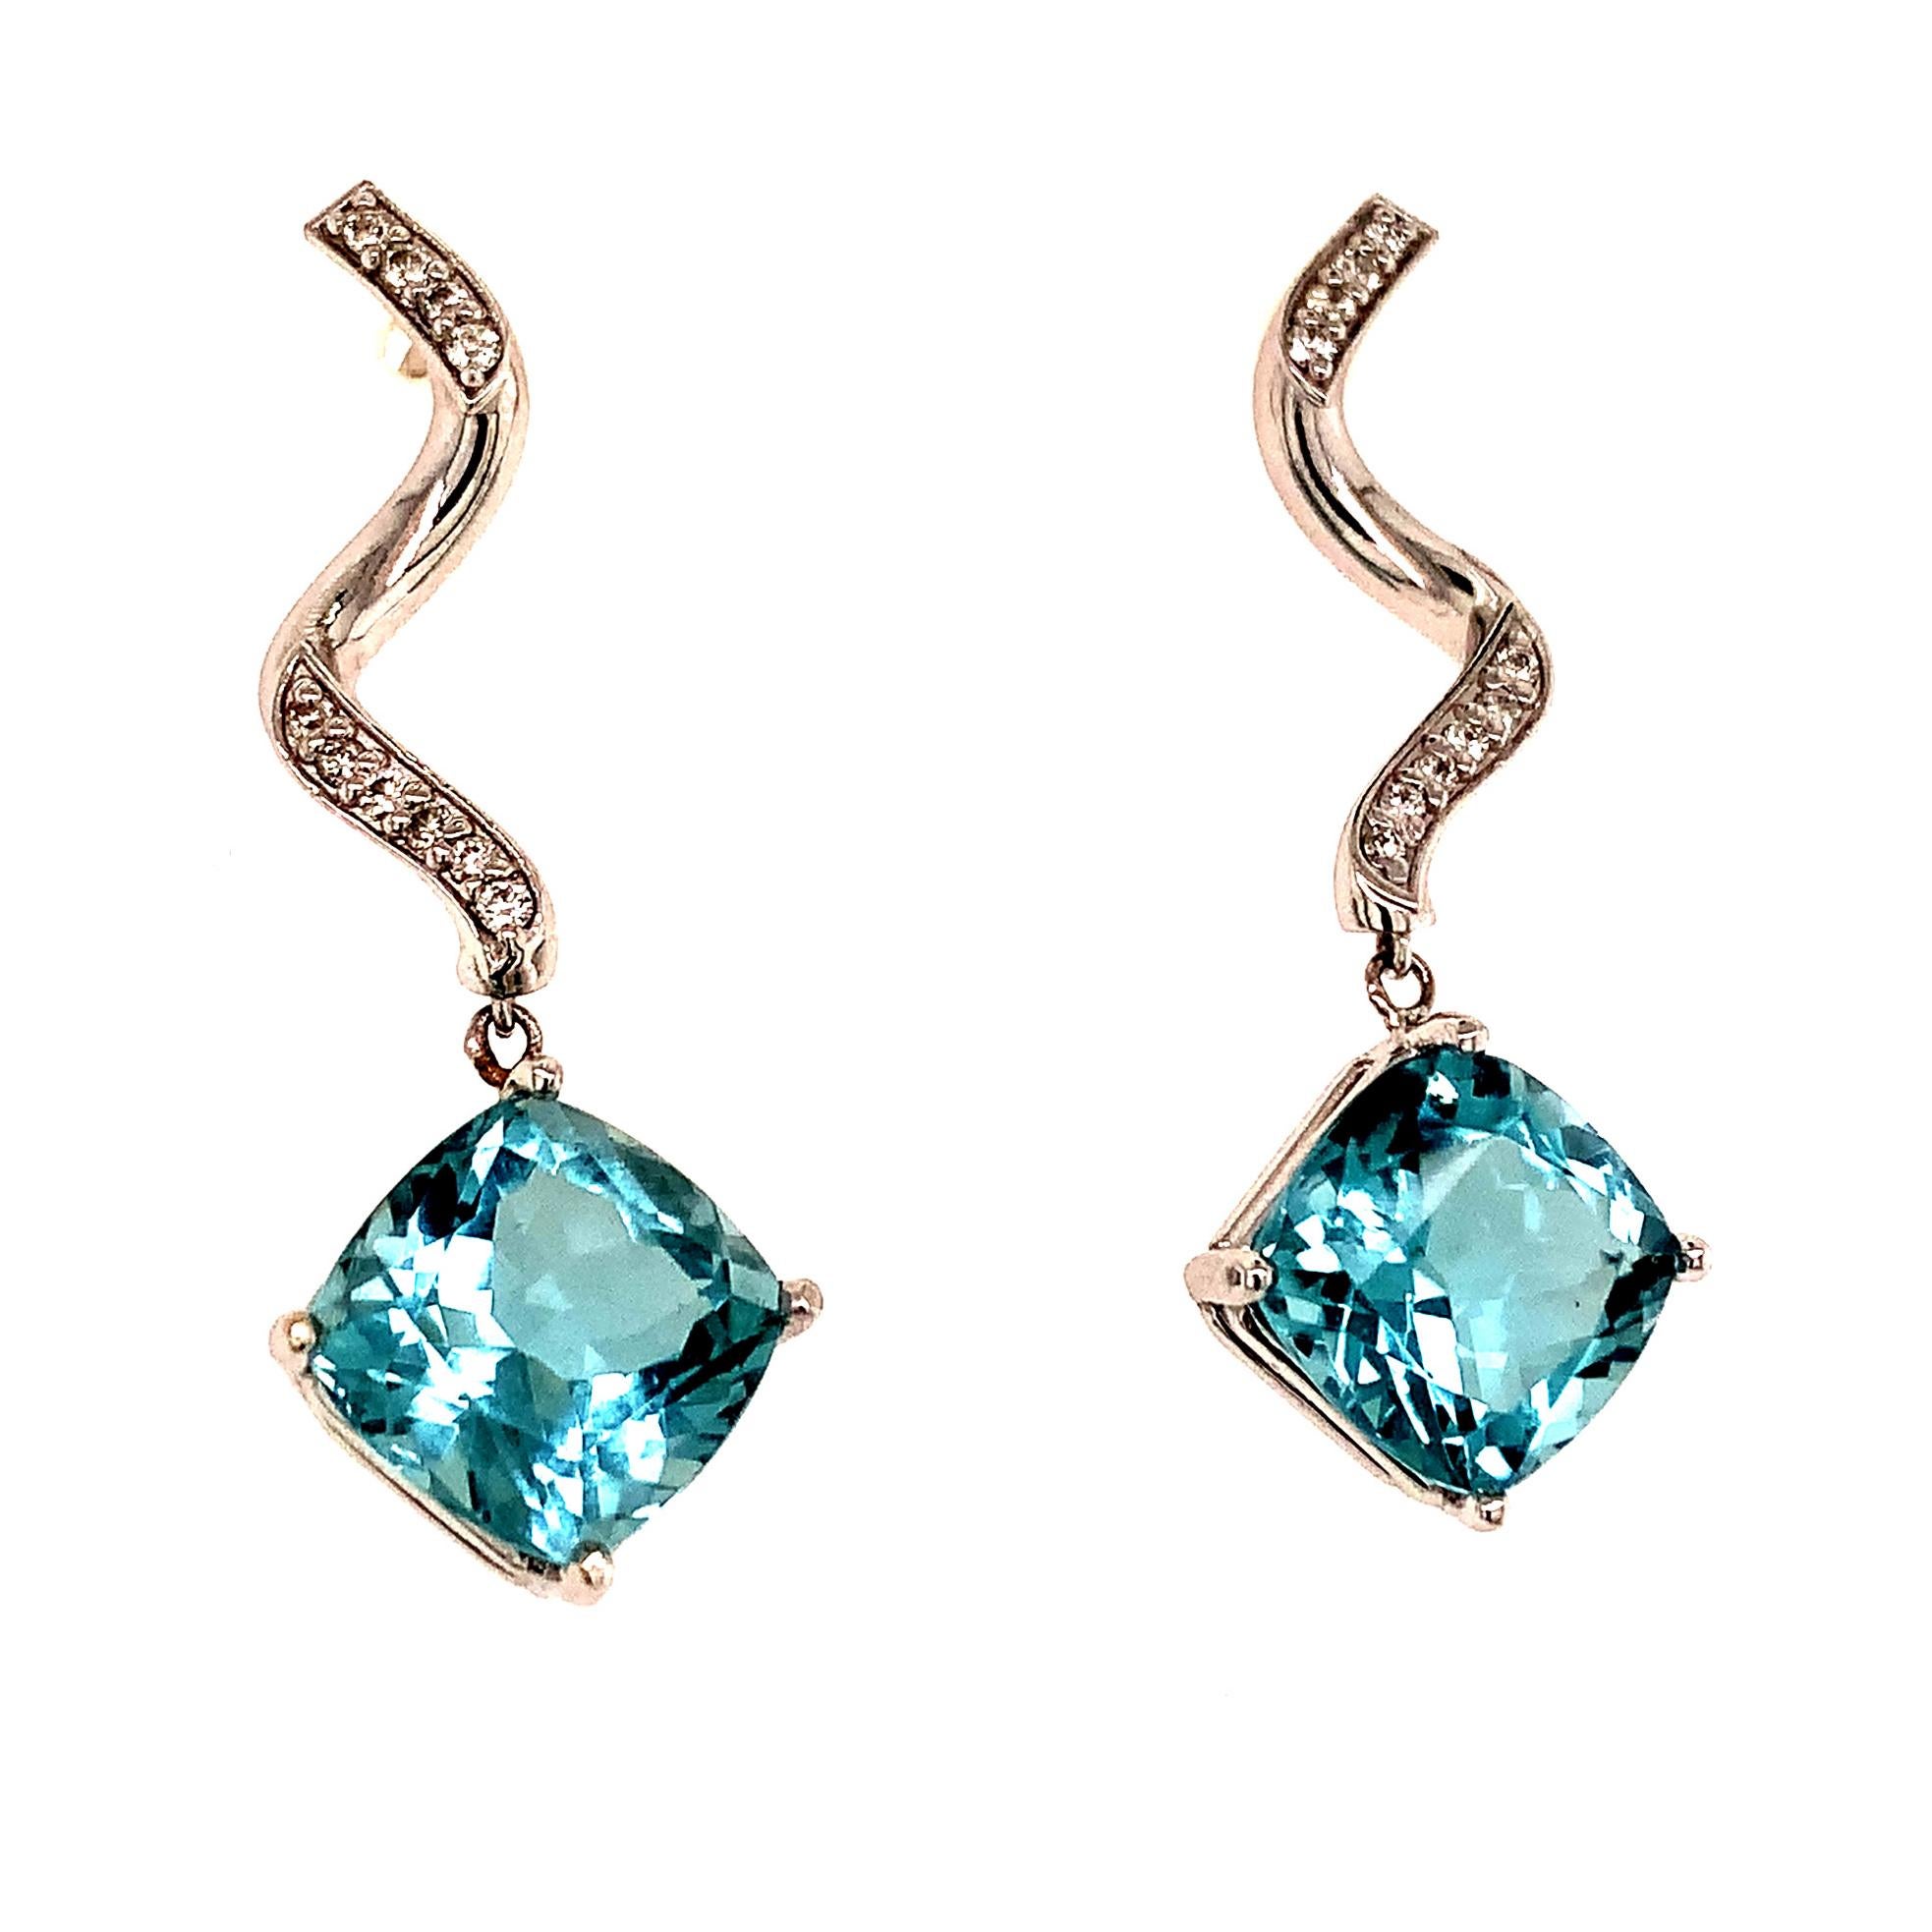 Natural Aquamarine Diamond Earrings 14k Gold 8.15 TCW Certified For Sale 4